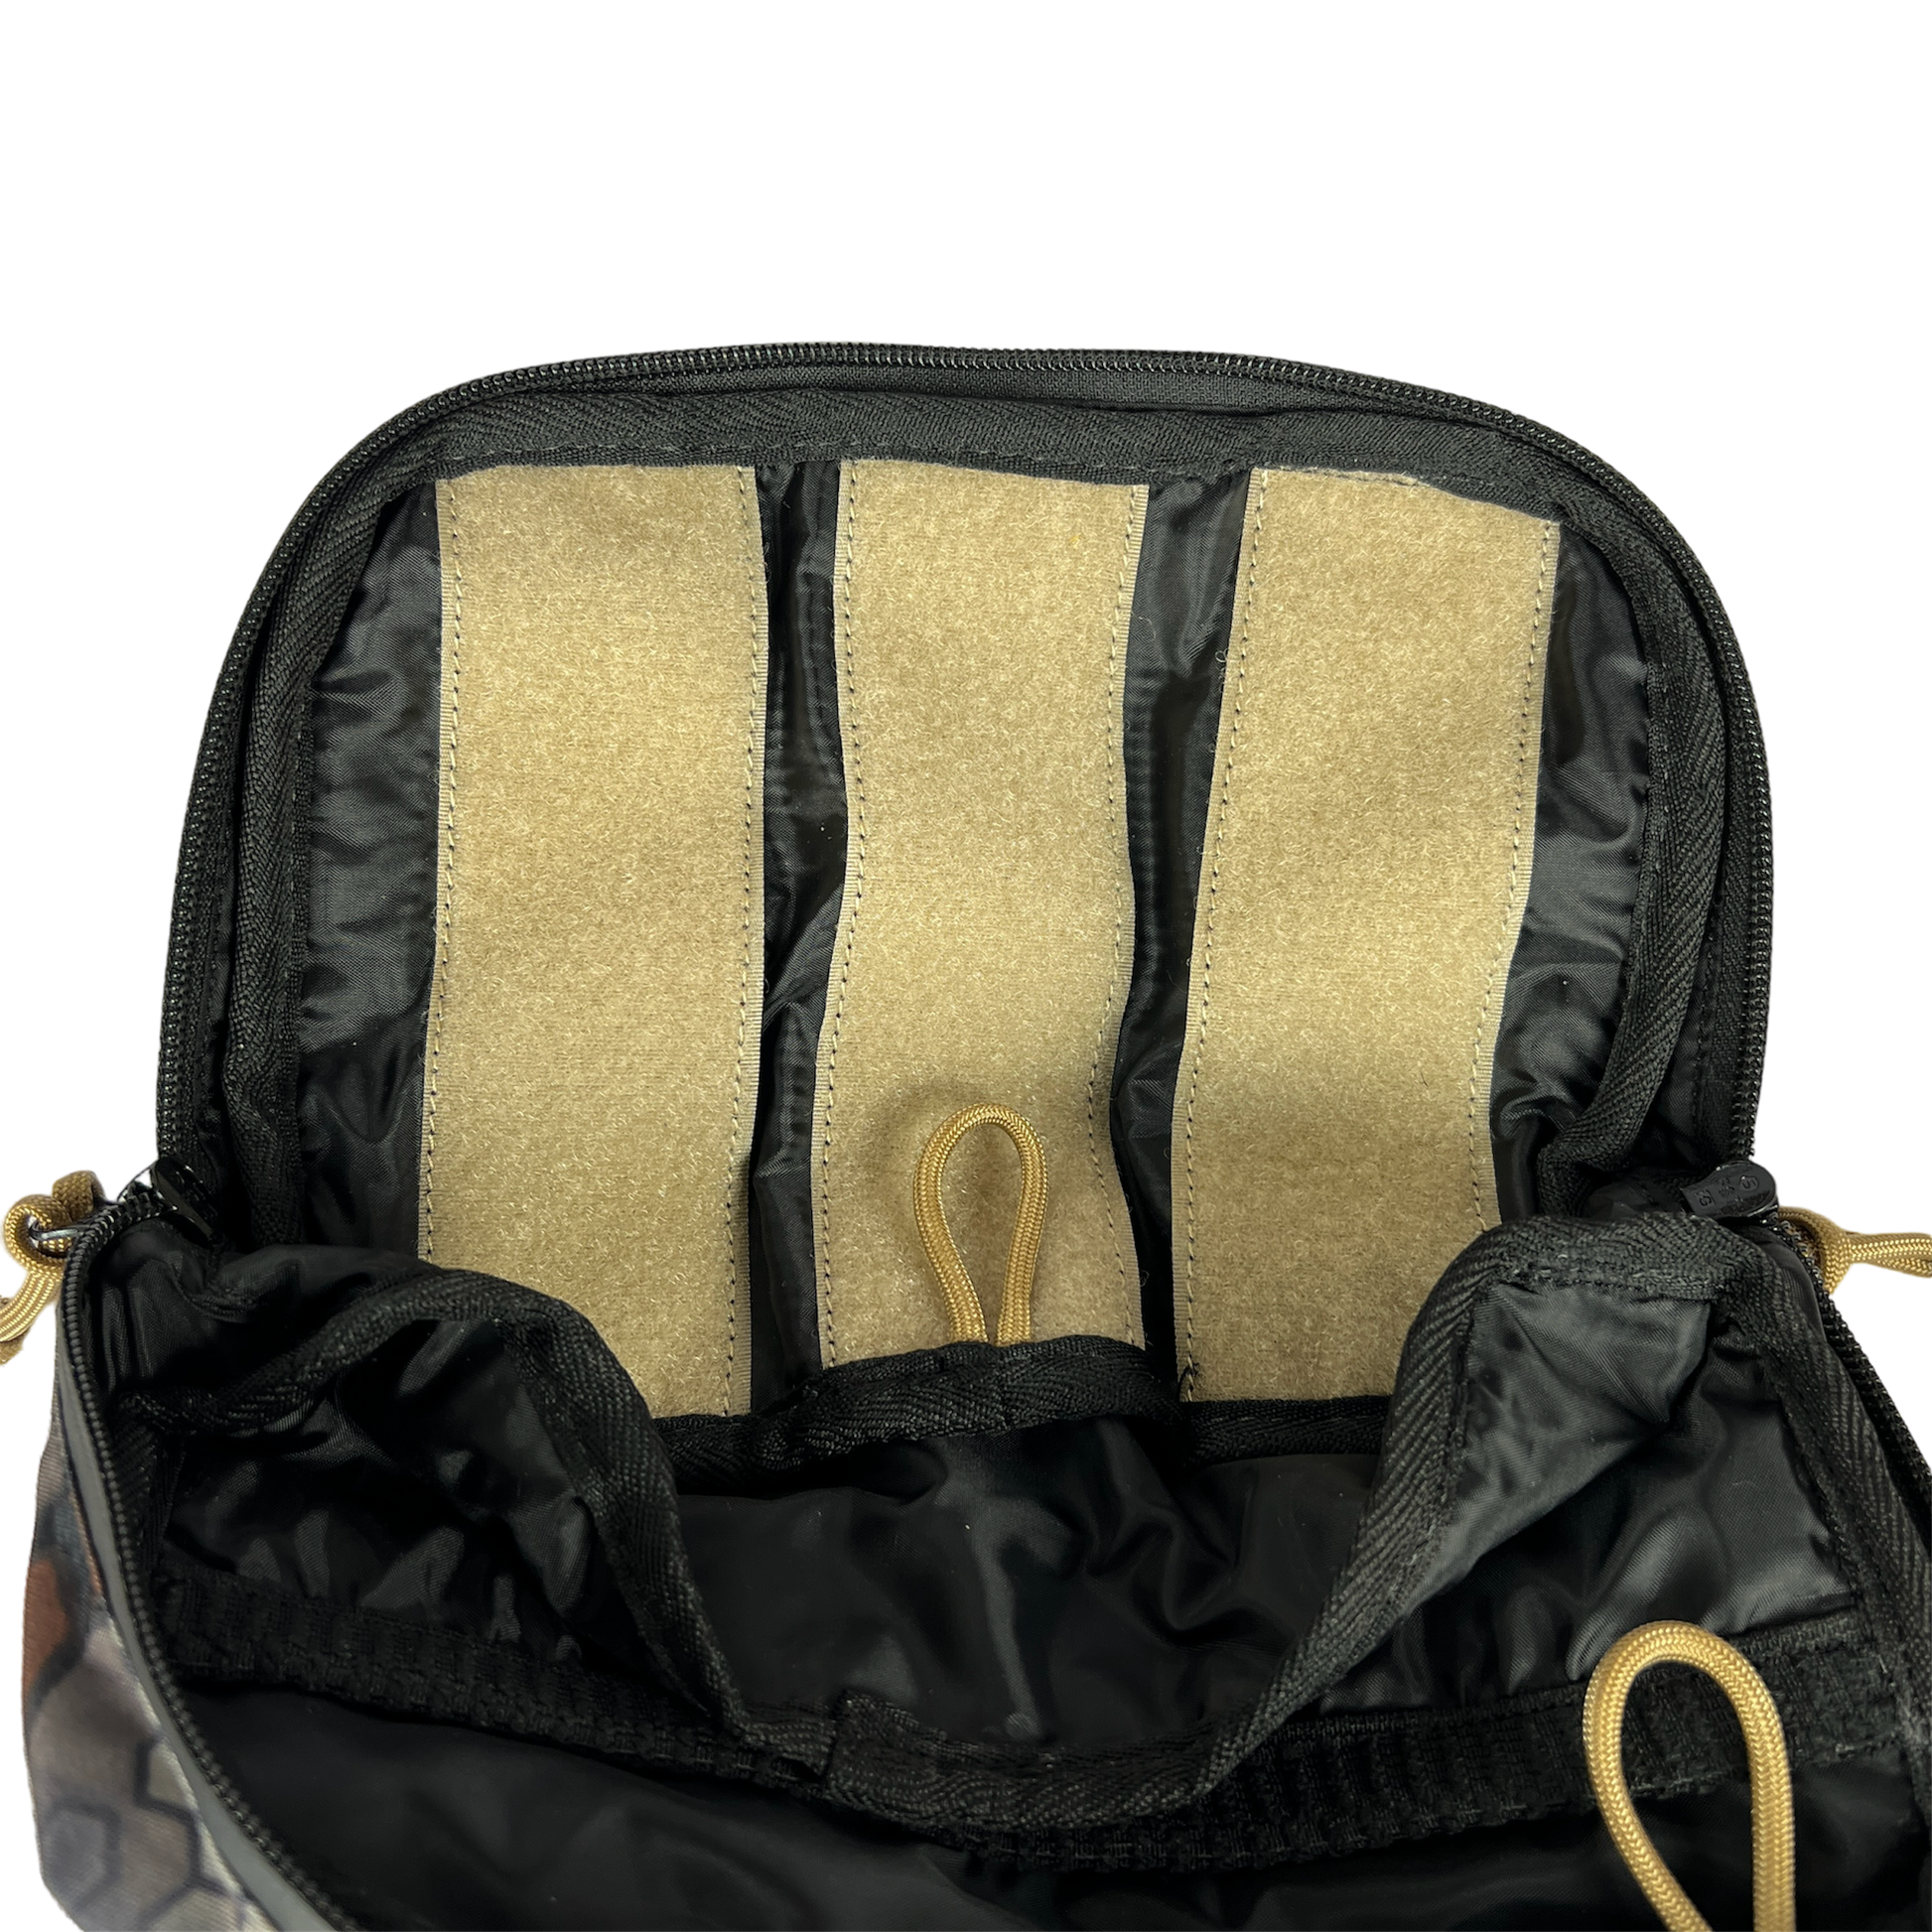 Firearm concealment gear bag and fishing chest pack